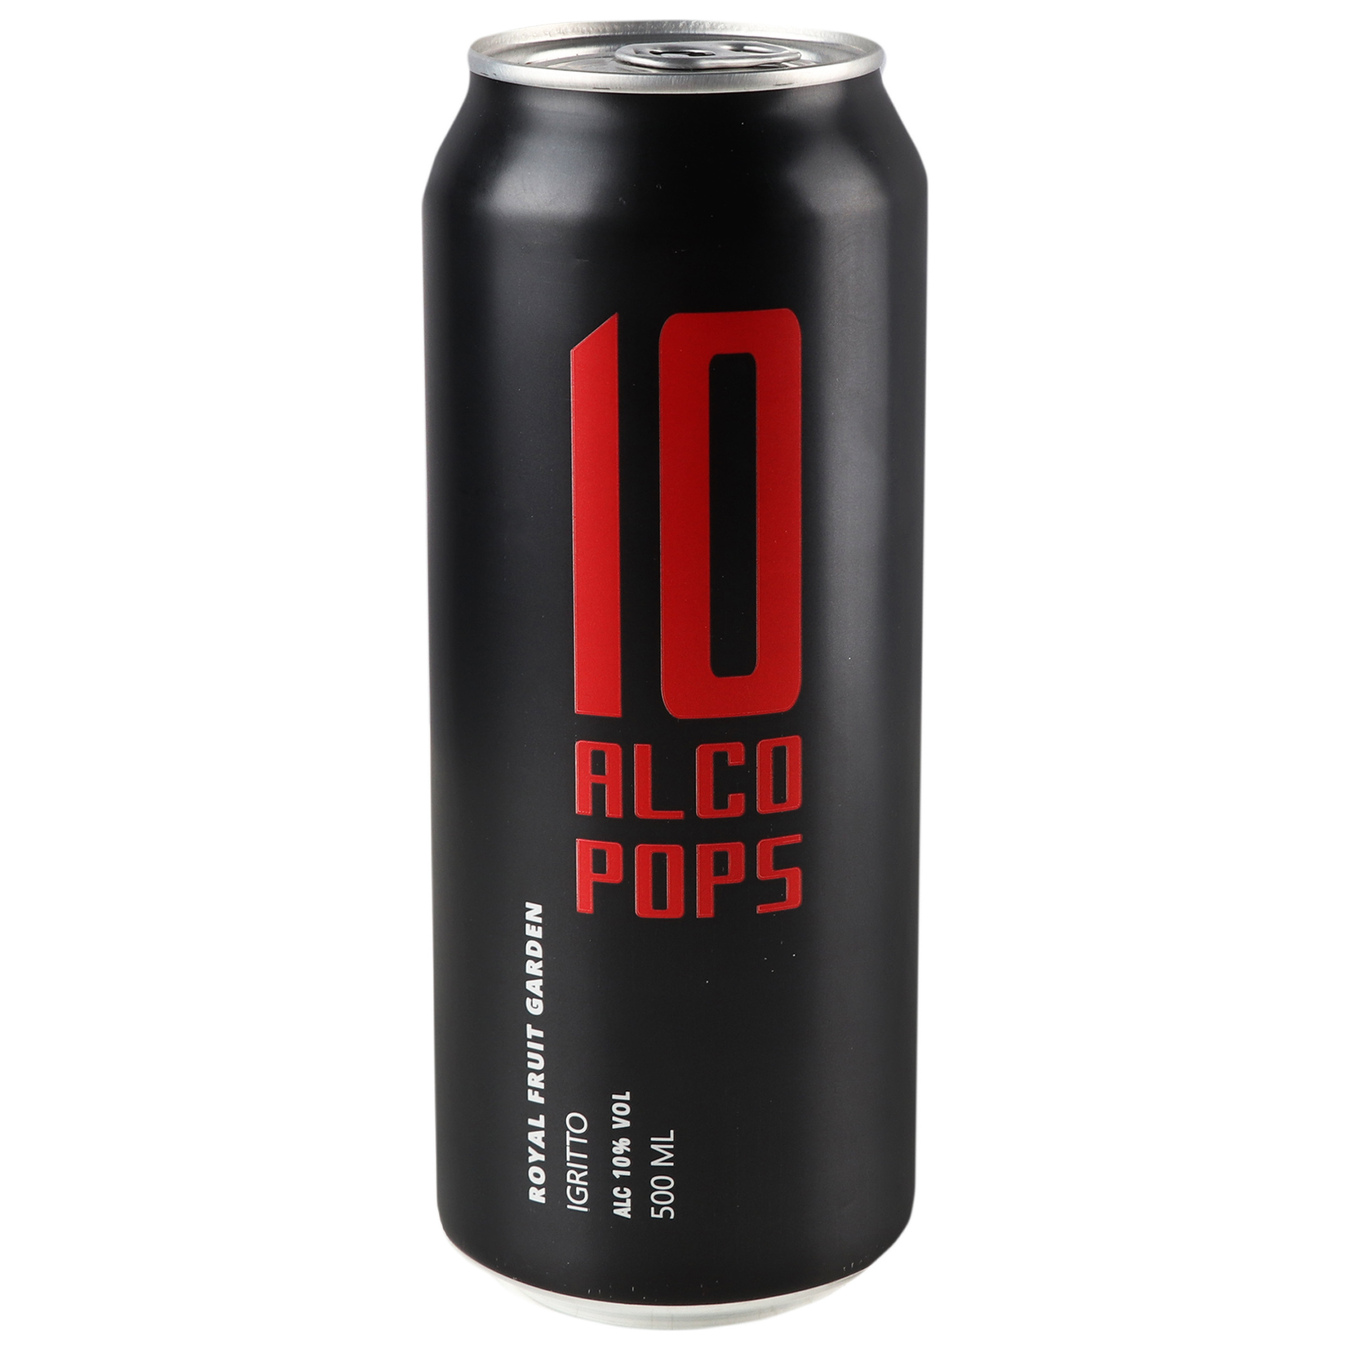 Fermented carbonated drink Alco Pops Igritto 10% 0.5 l iron can 3